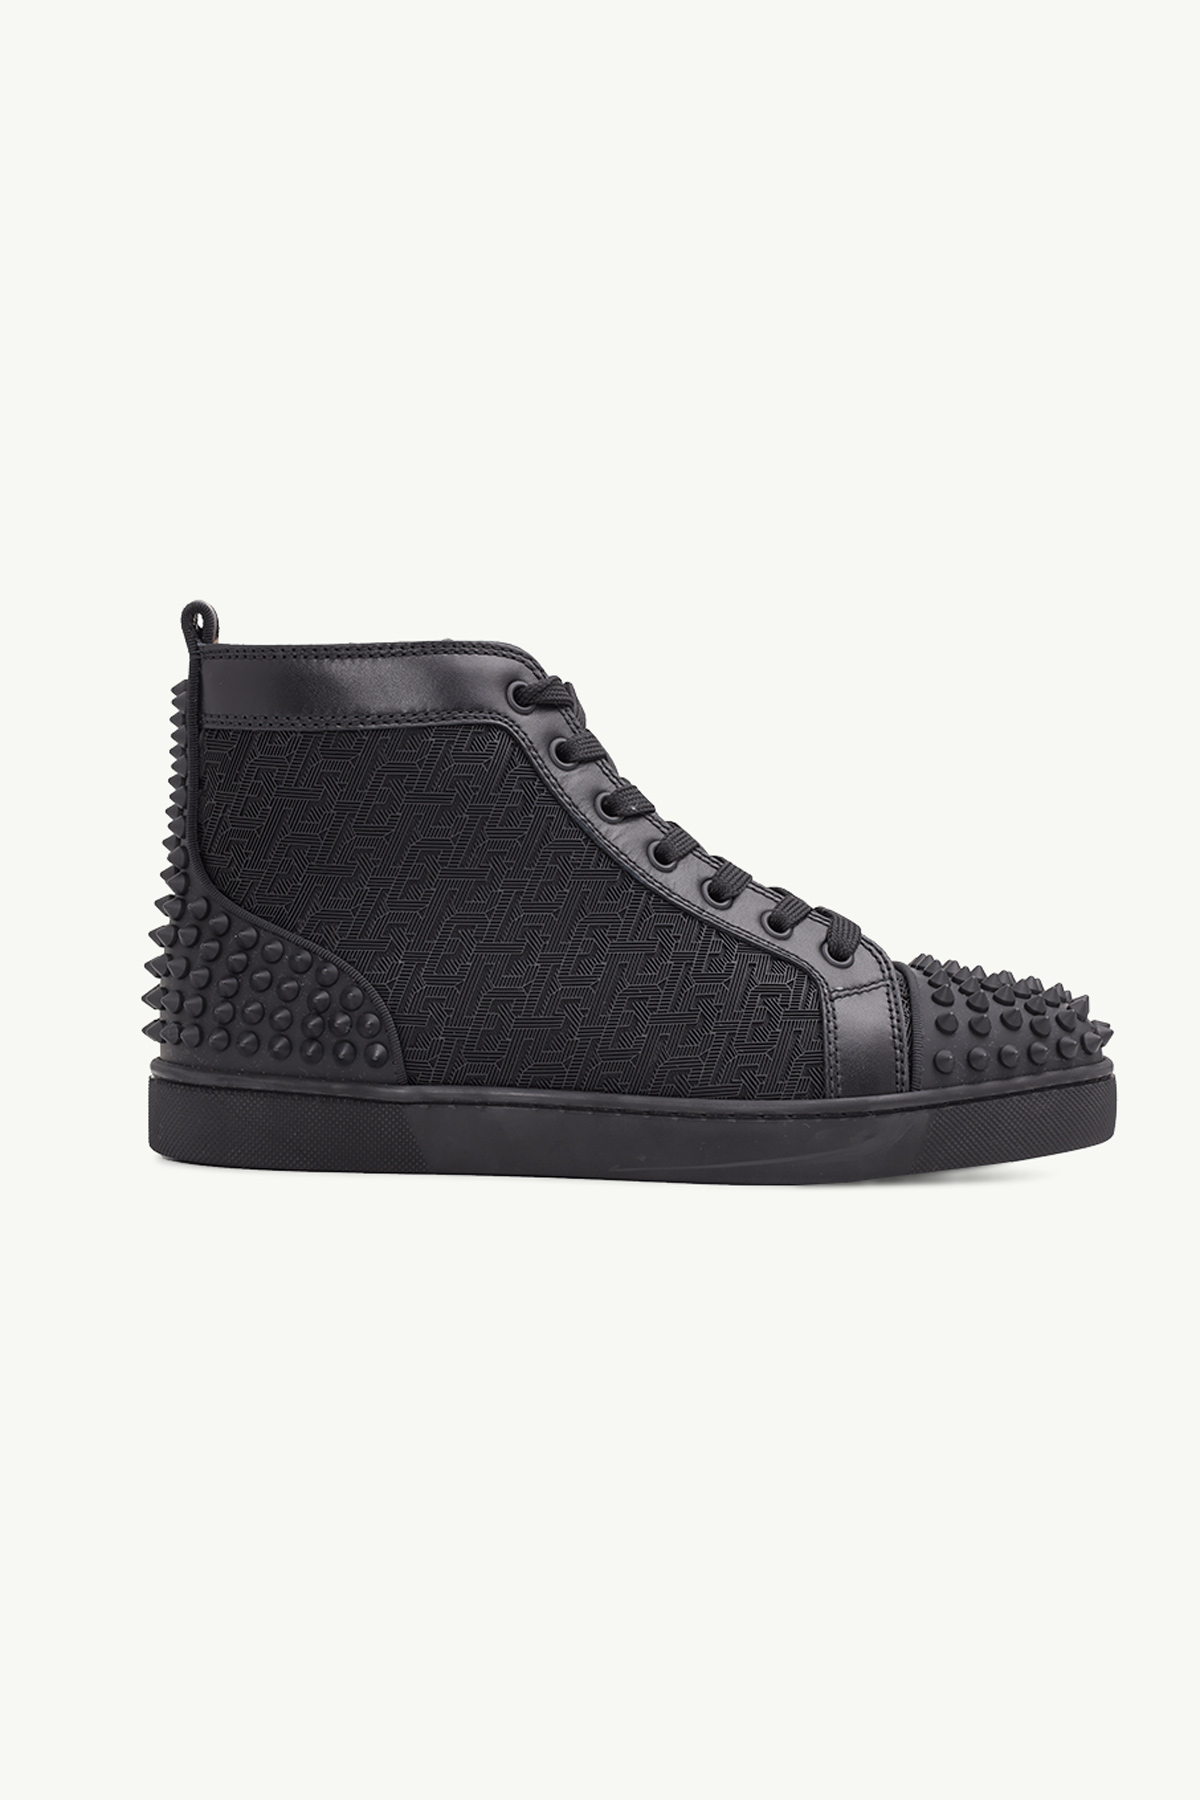 CHRISTIAN LOUBOUTIN Men Lou Spikes 2 High Top Sneakers in All Black Rubber 0